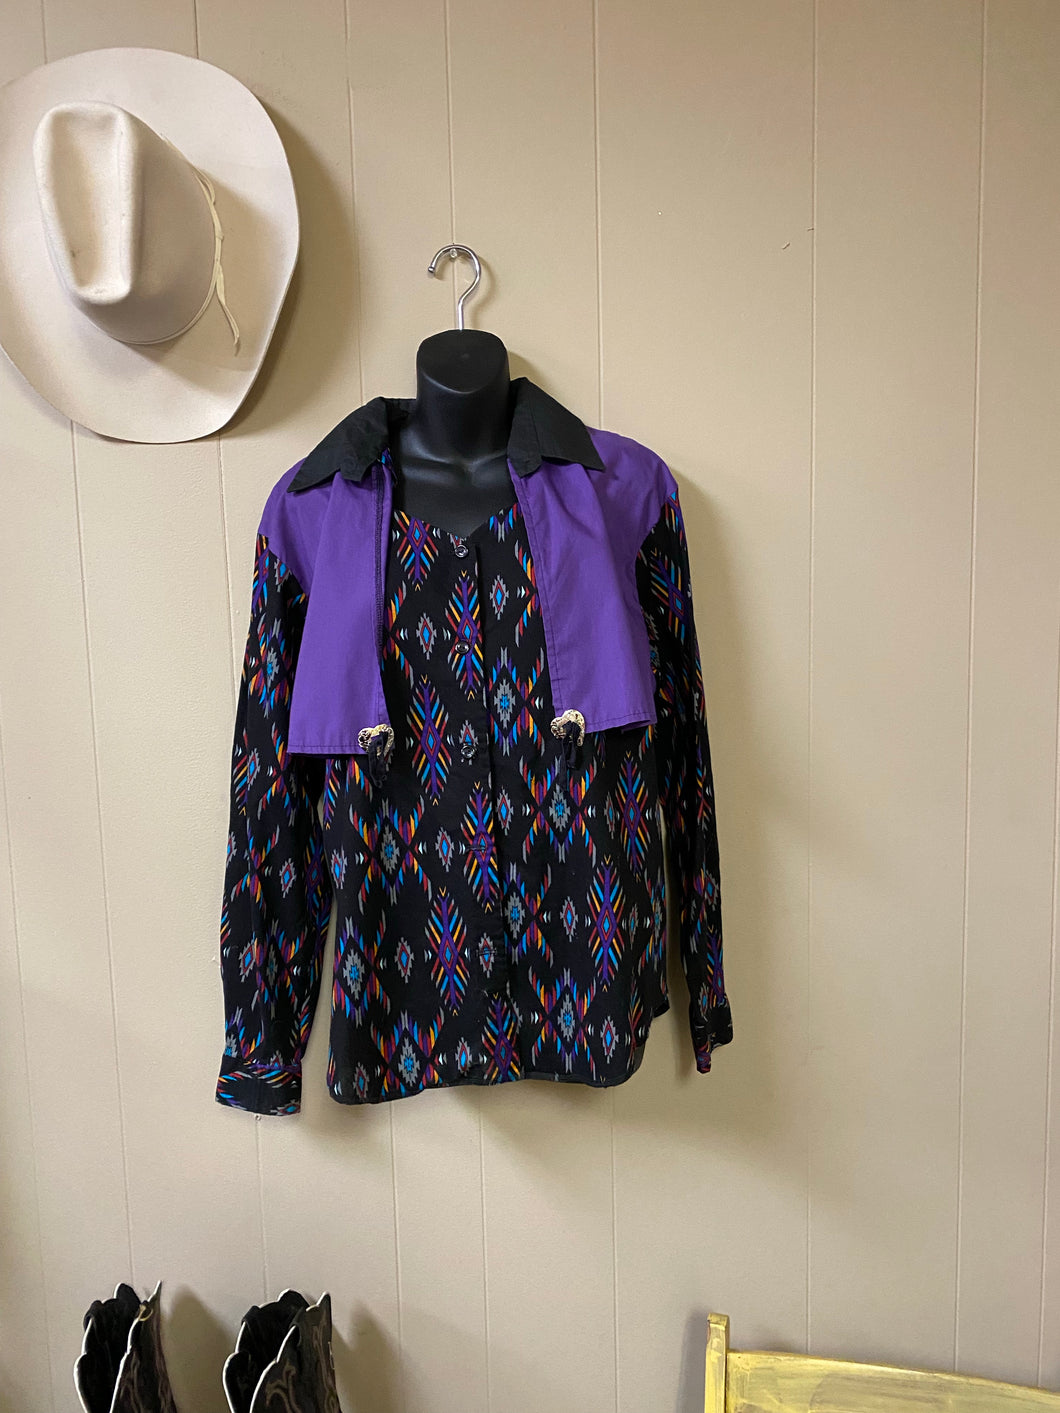 Jr Girls/Womens  Vintage 80s Purple and Black Button Up shirt Size youth 16 or Women's sm